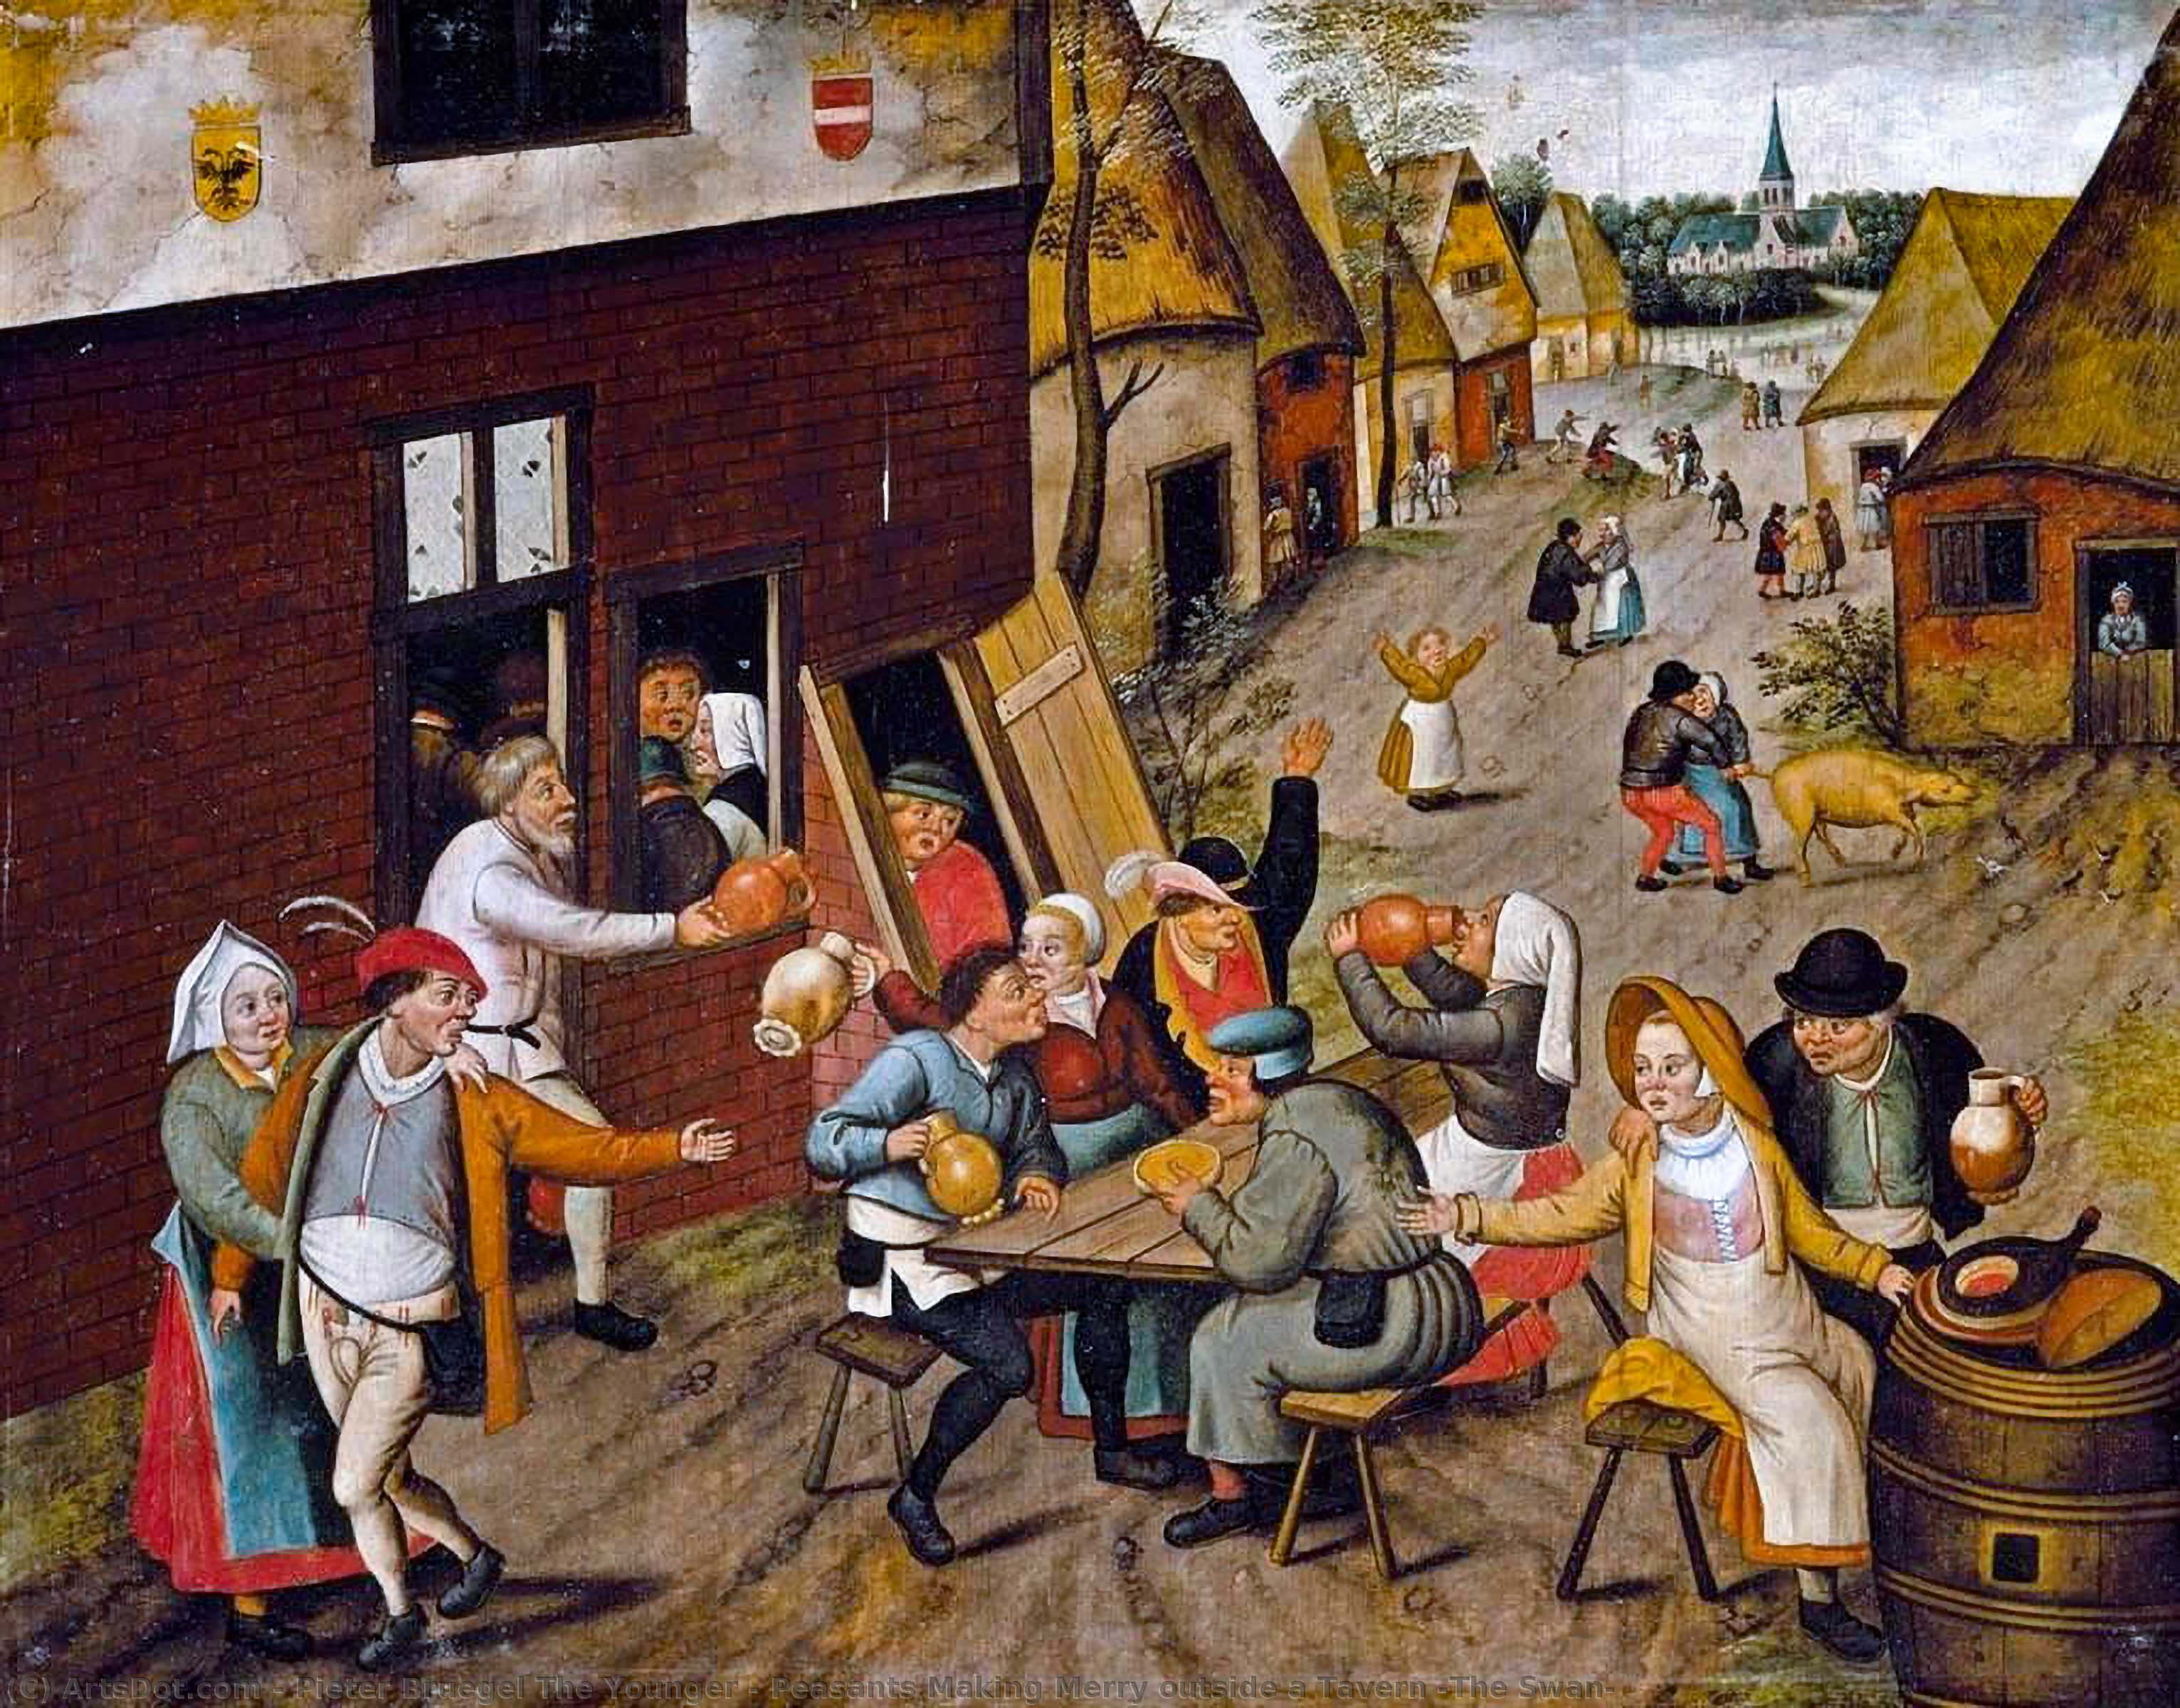 WikiOO.org - 백과 사전 - 회화, 삽화 Pieter Bruegel The Younger - Peasants Making Merry outside a Tavern 'The Swan'